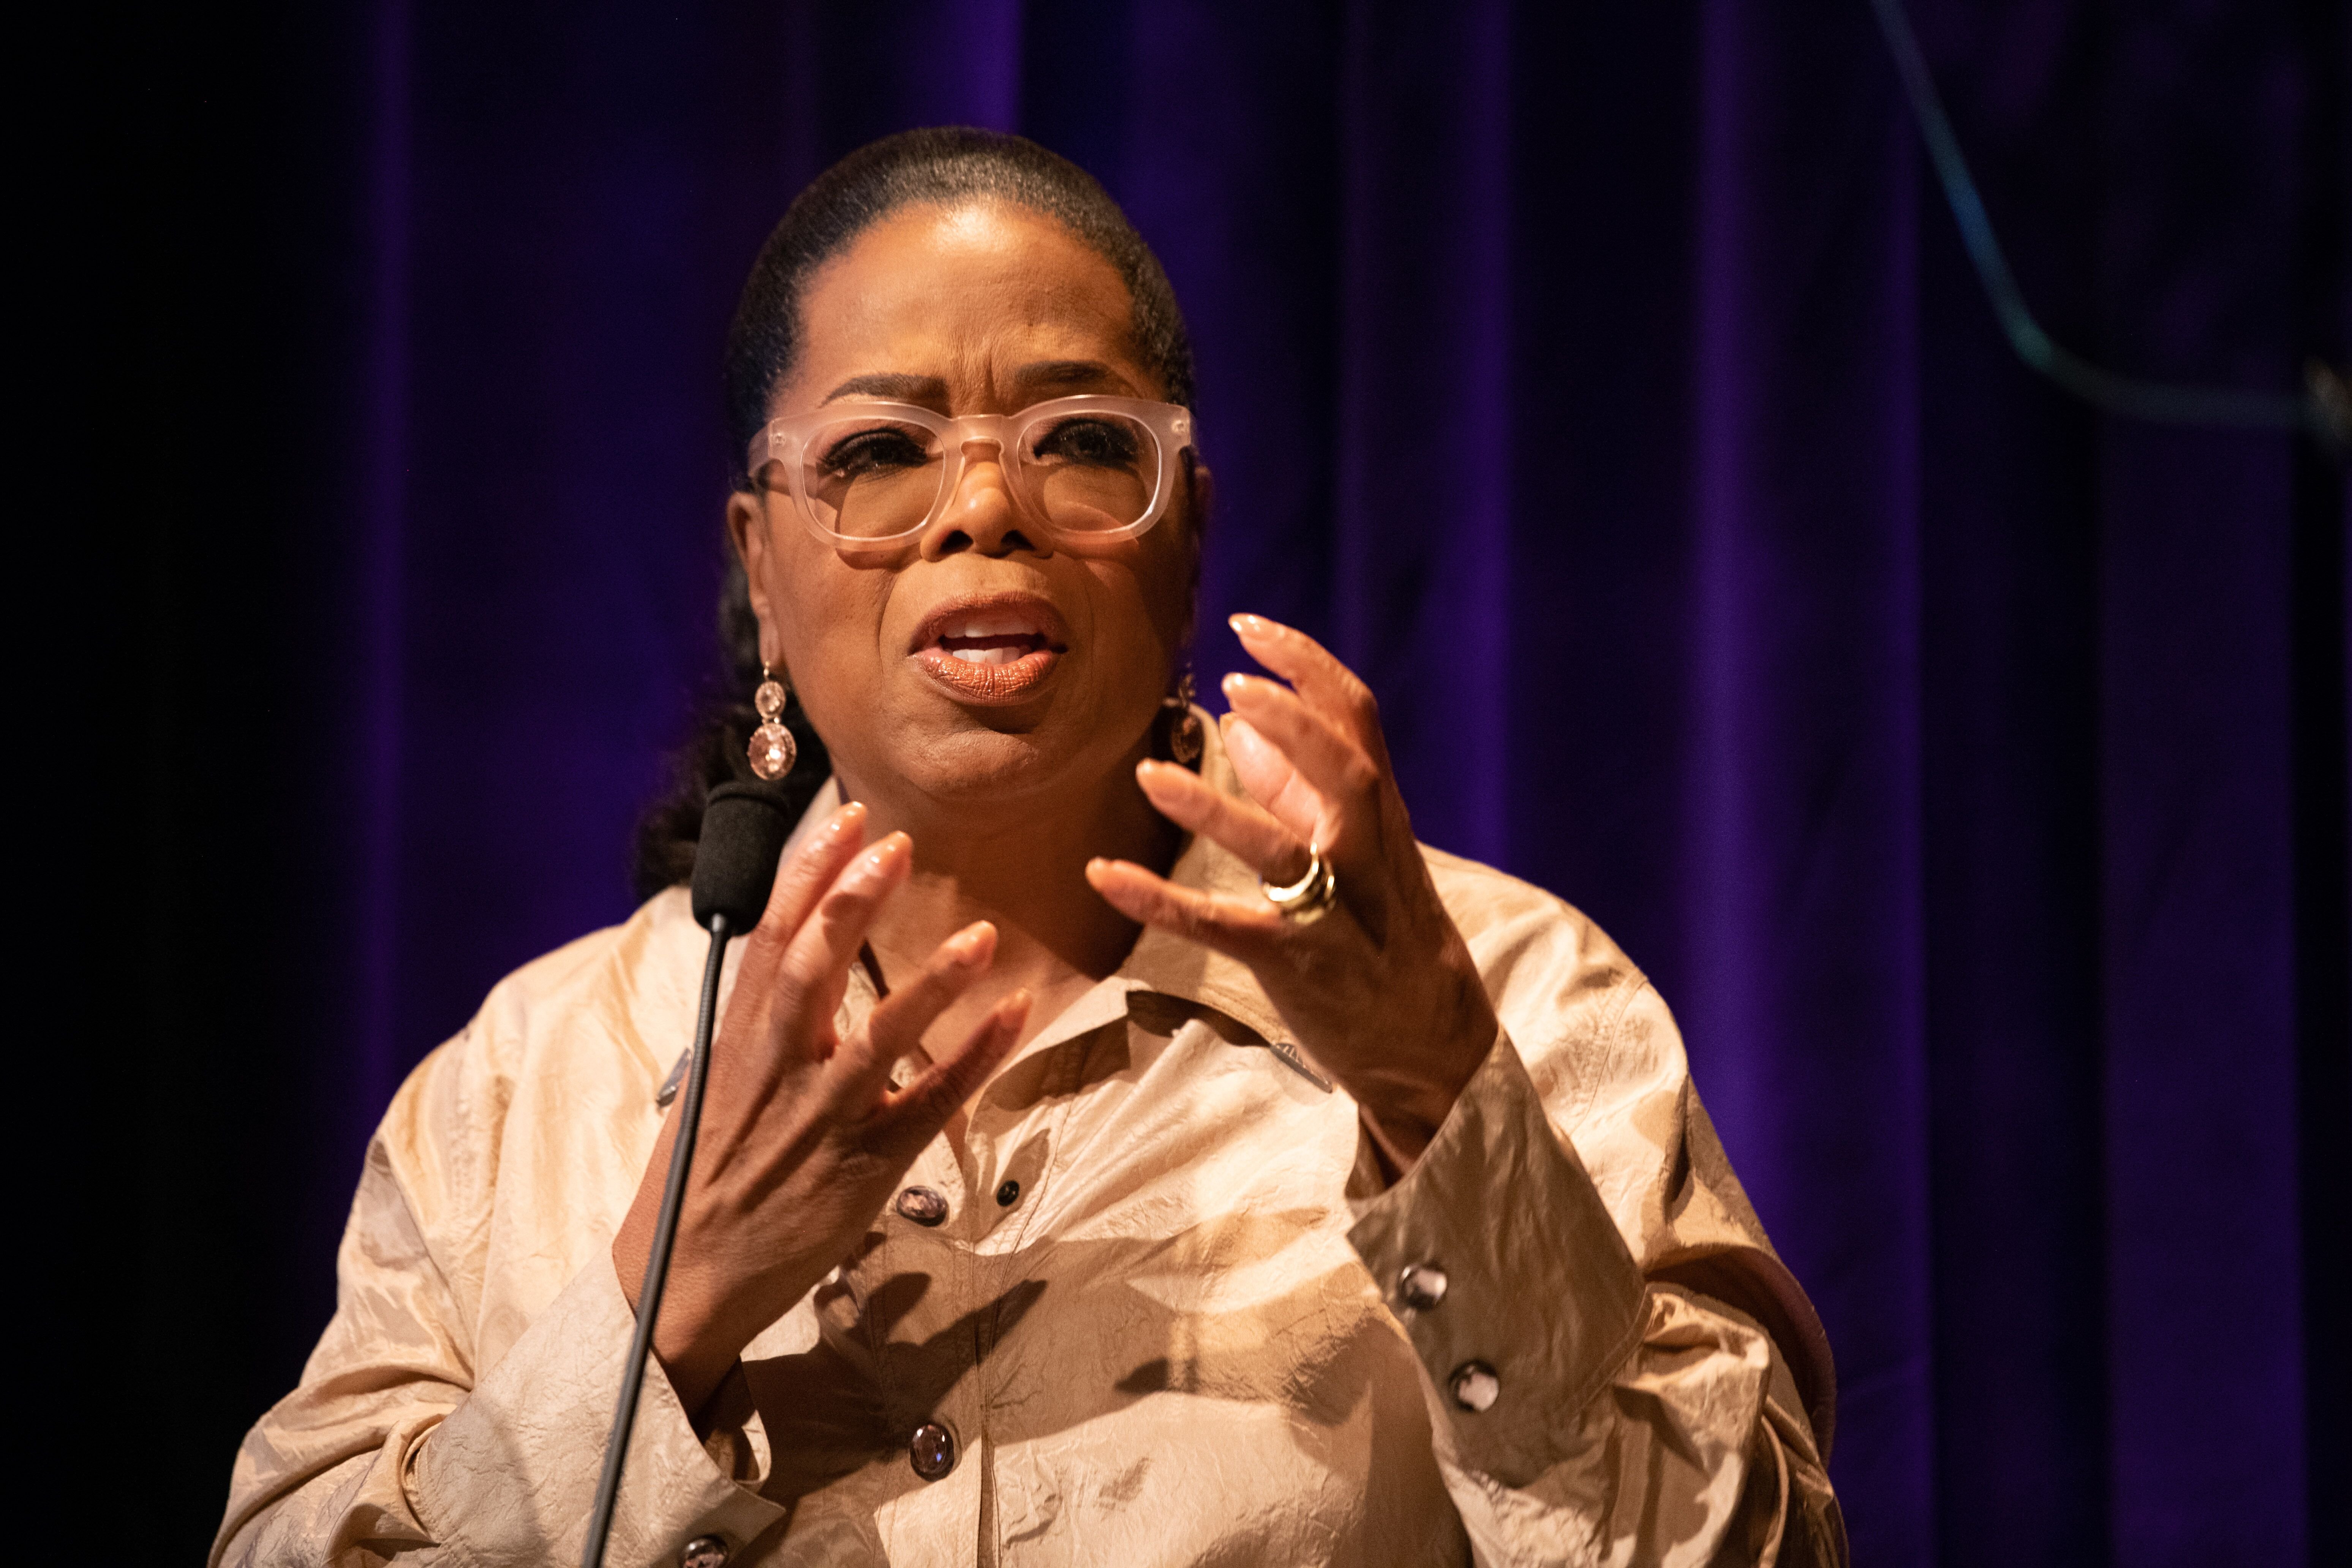 Oprah Winfrey speaks onstage at the Women's E3 Summit. | Source: Getty Images